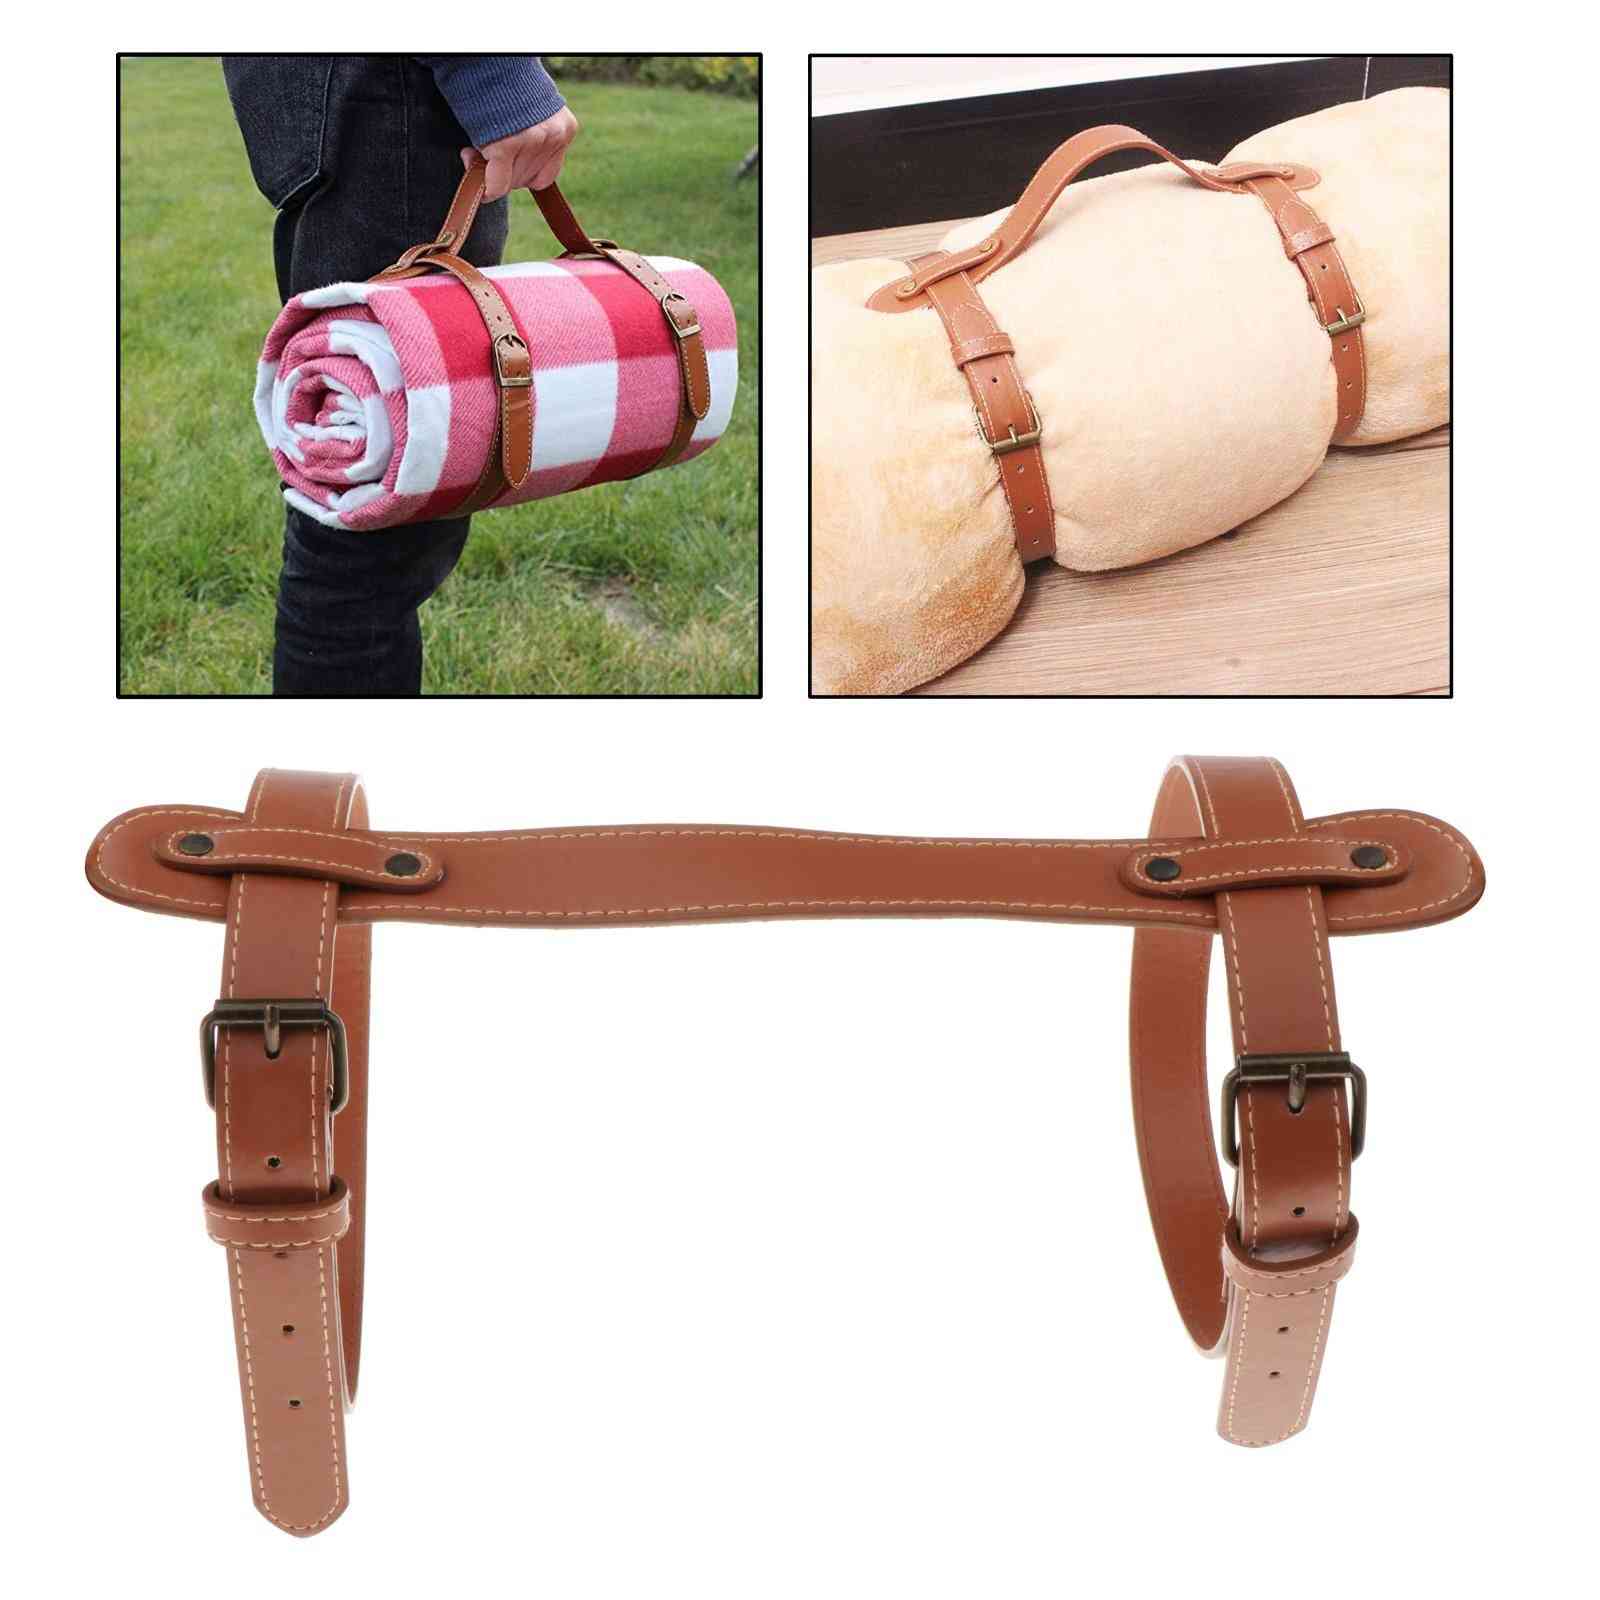 Pu Leather Picnic Blanket Strap Camping, Picnics, Motorcycle Bedroll Straps